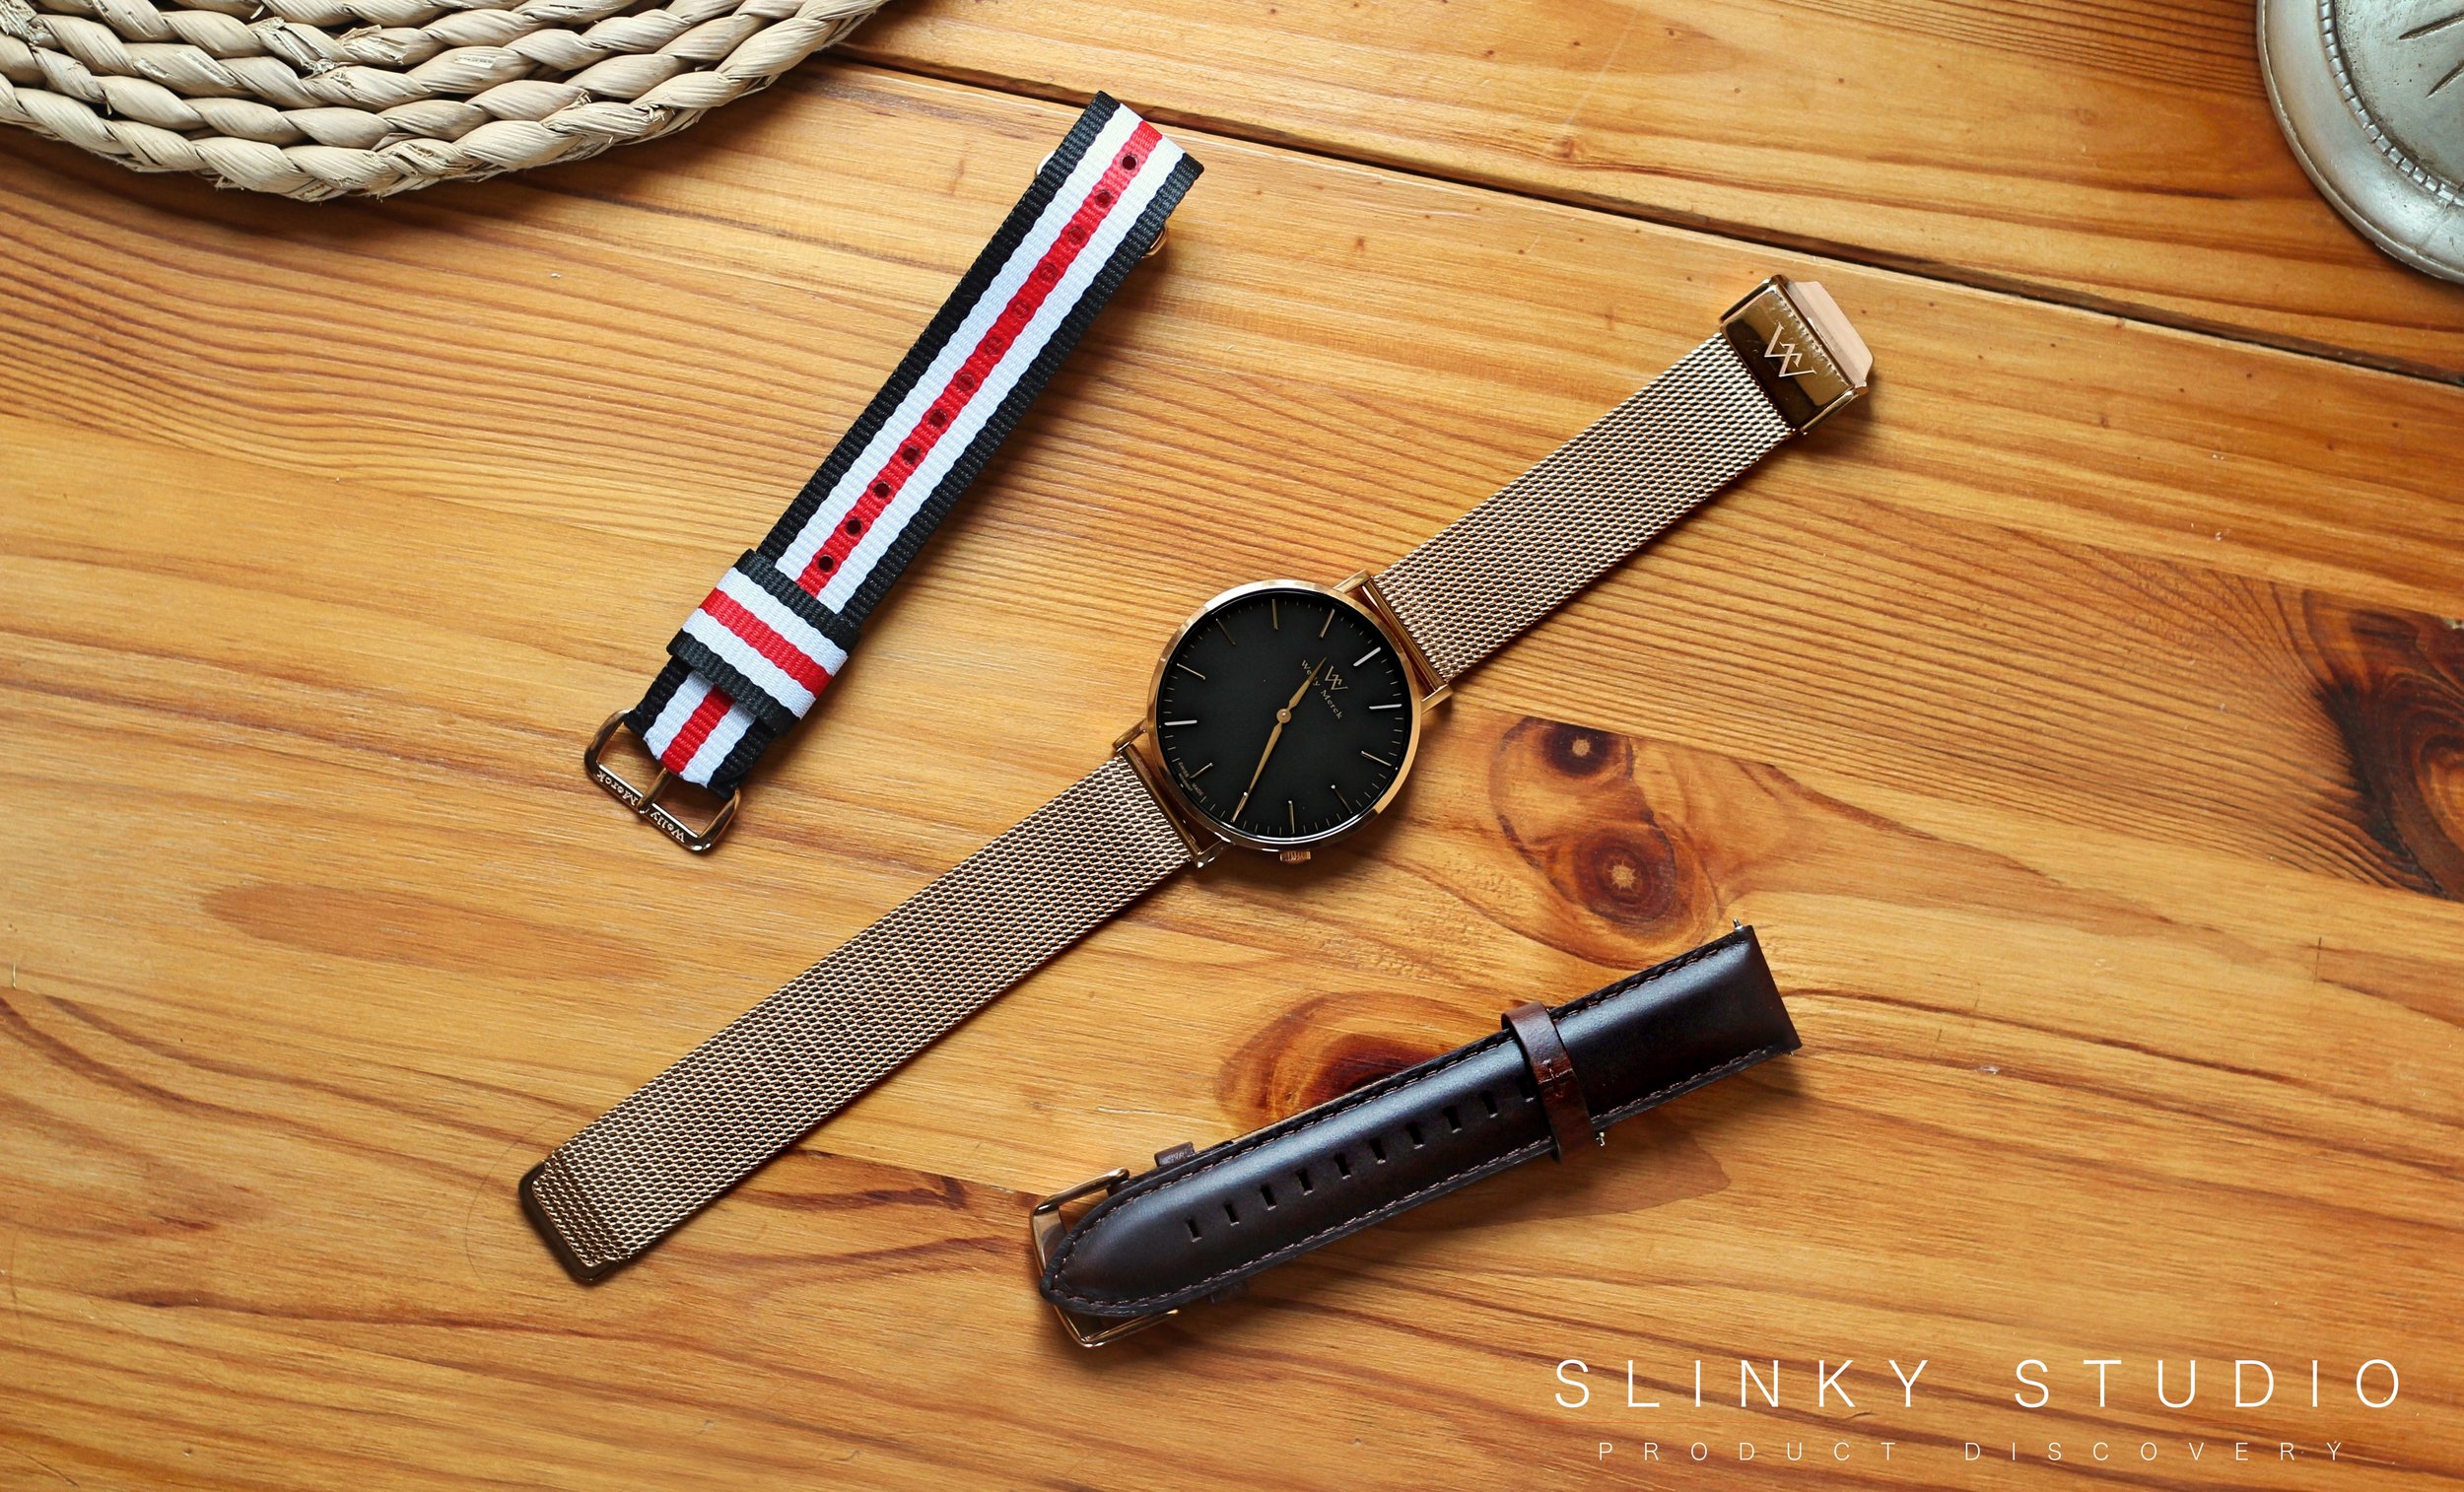 Welly Merck Classic Zurich Watch Rose Gold Stainless Steel Leather & Canvas Strap.jpg